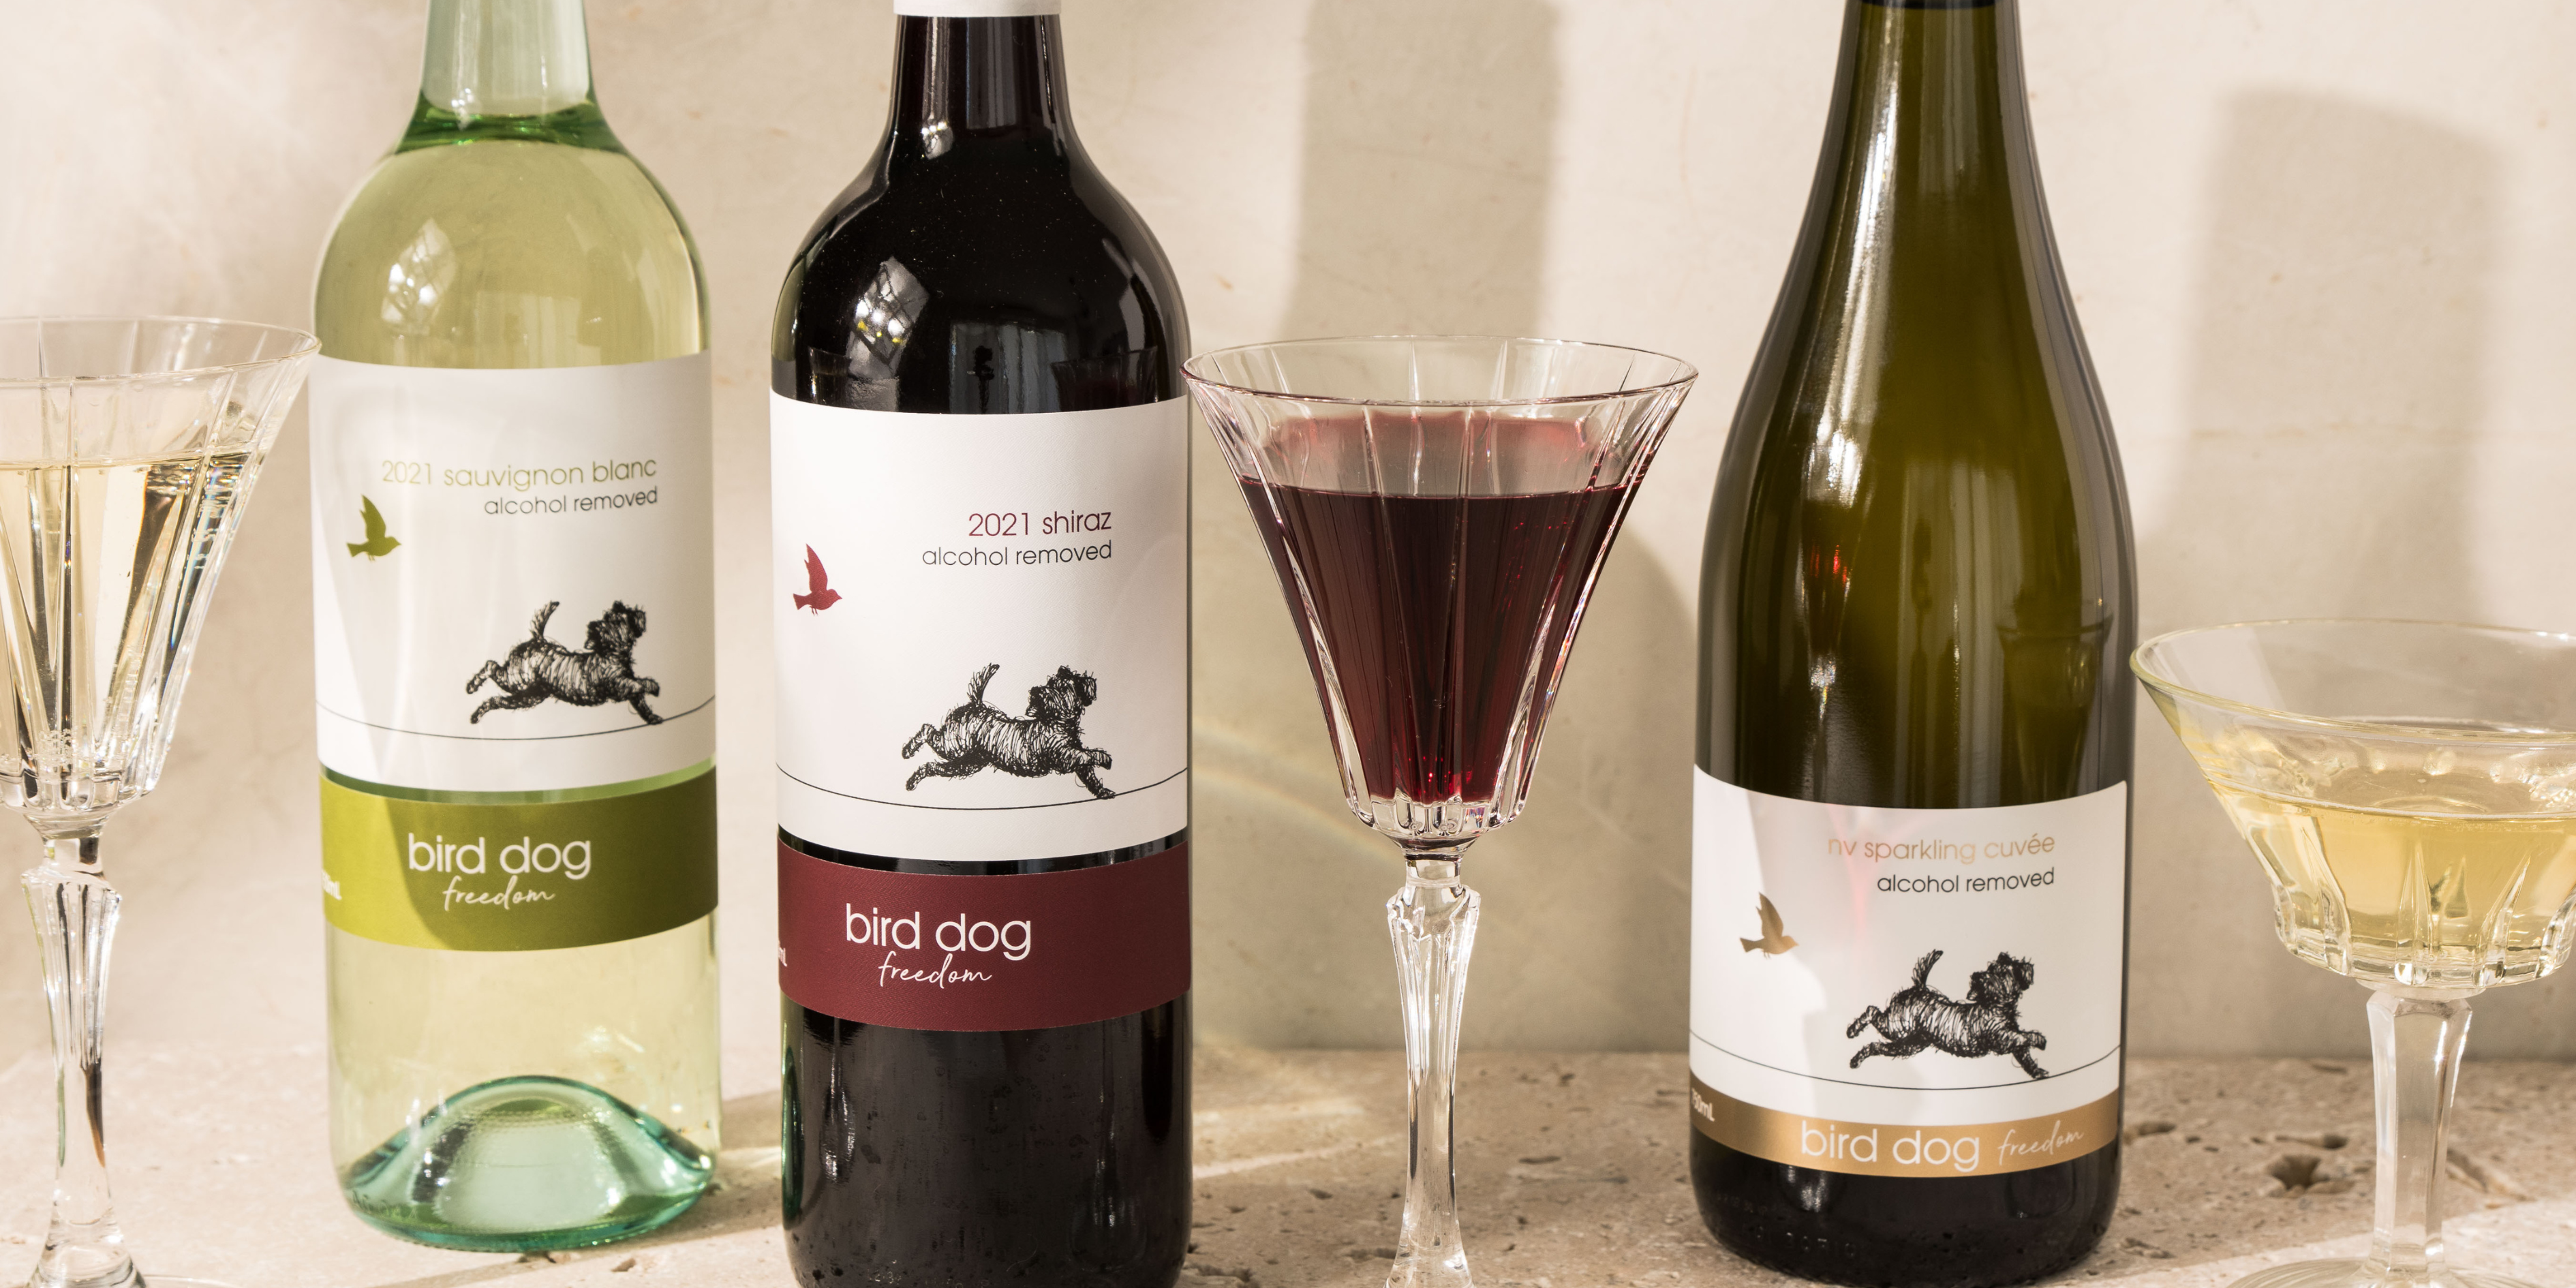 A bottle of each Bird Dog Alcohol removed wine with a poured glass of each beside the bottles